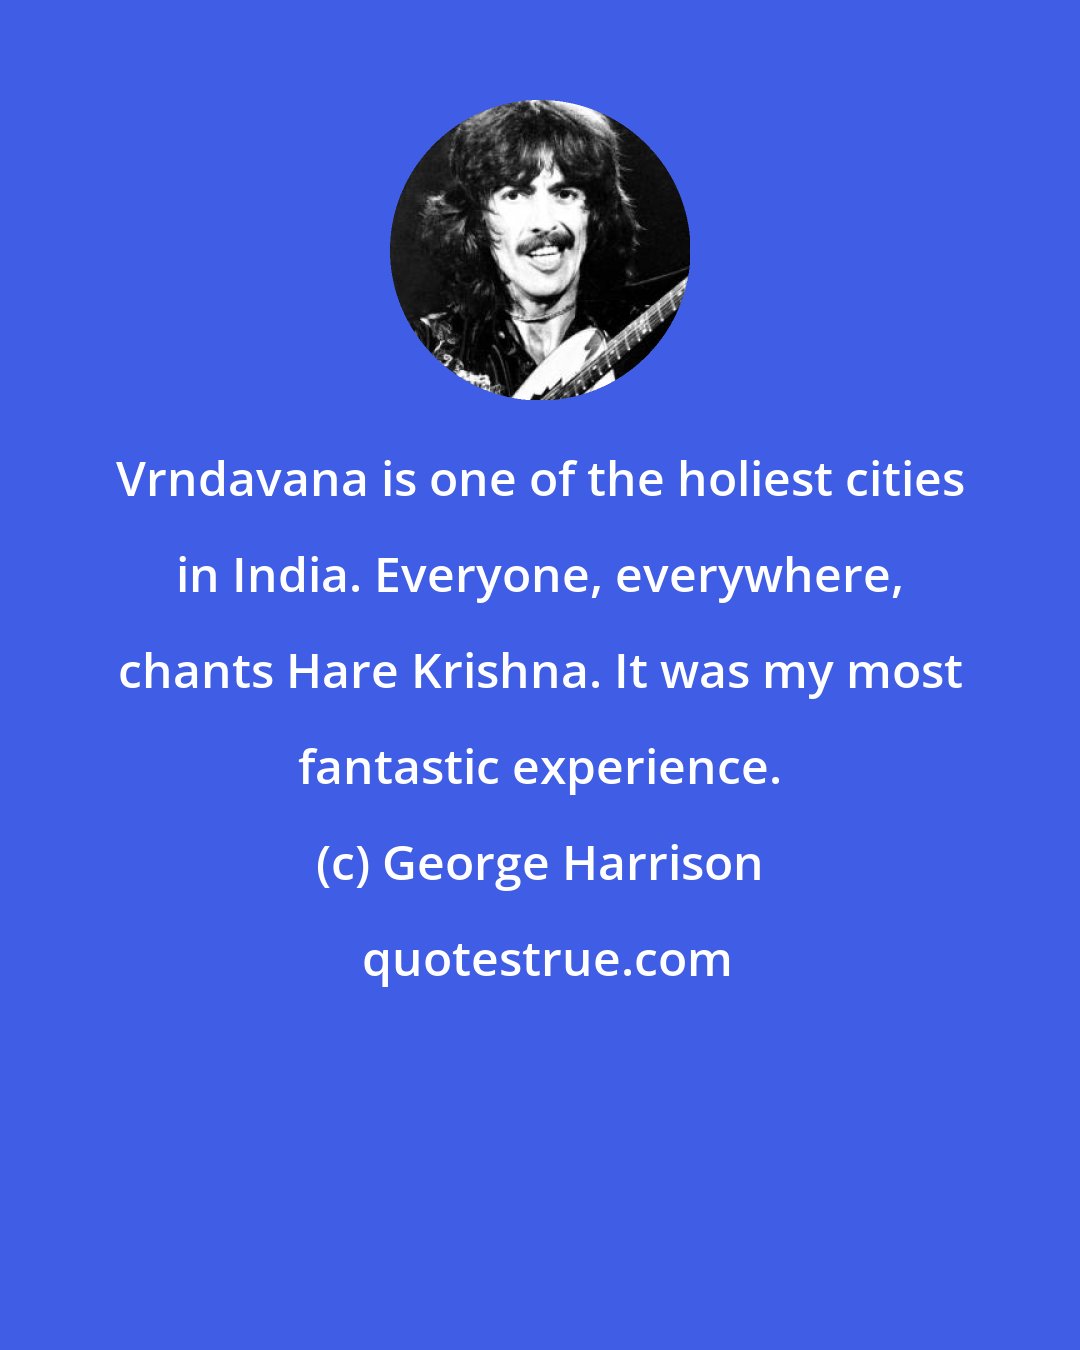 George Harrison: Vrndavana is one of the holiest cities in India. Everyone, everywhere, chants Hare Krishna. It was my most fantastic experience.